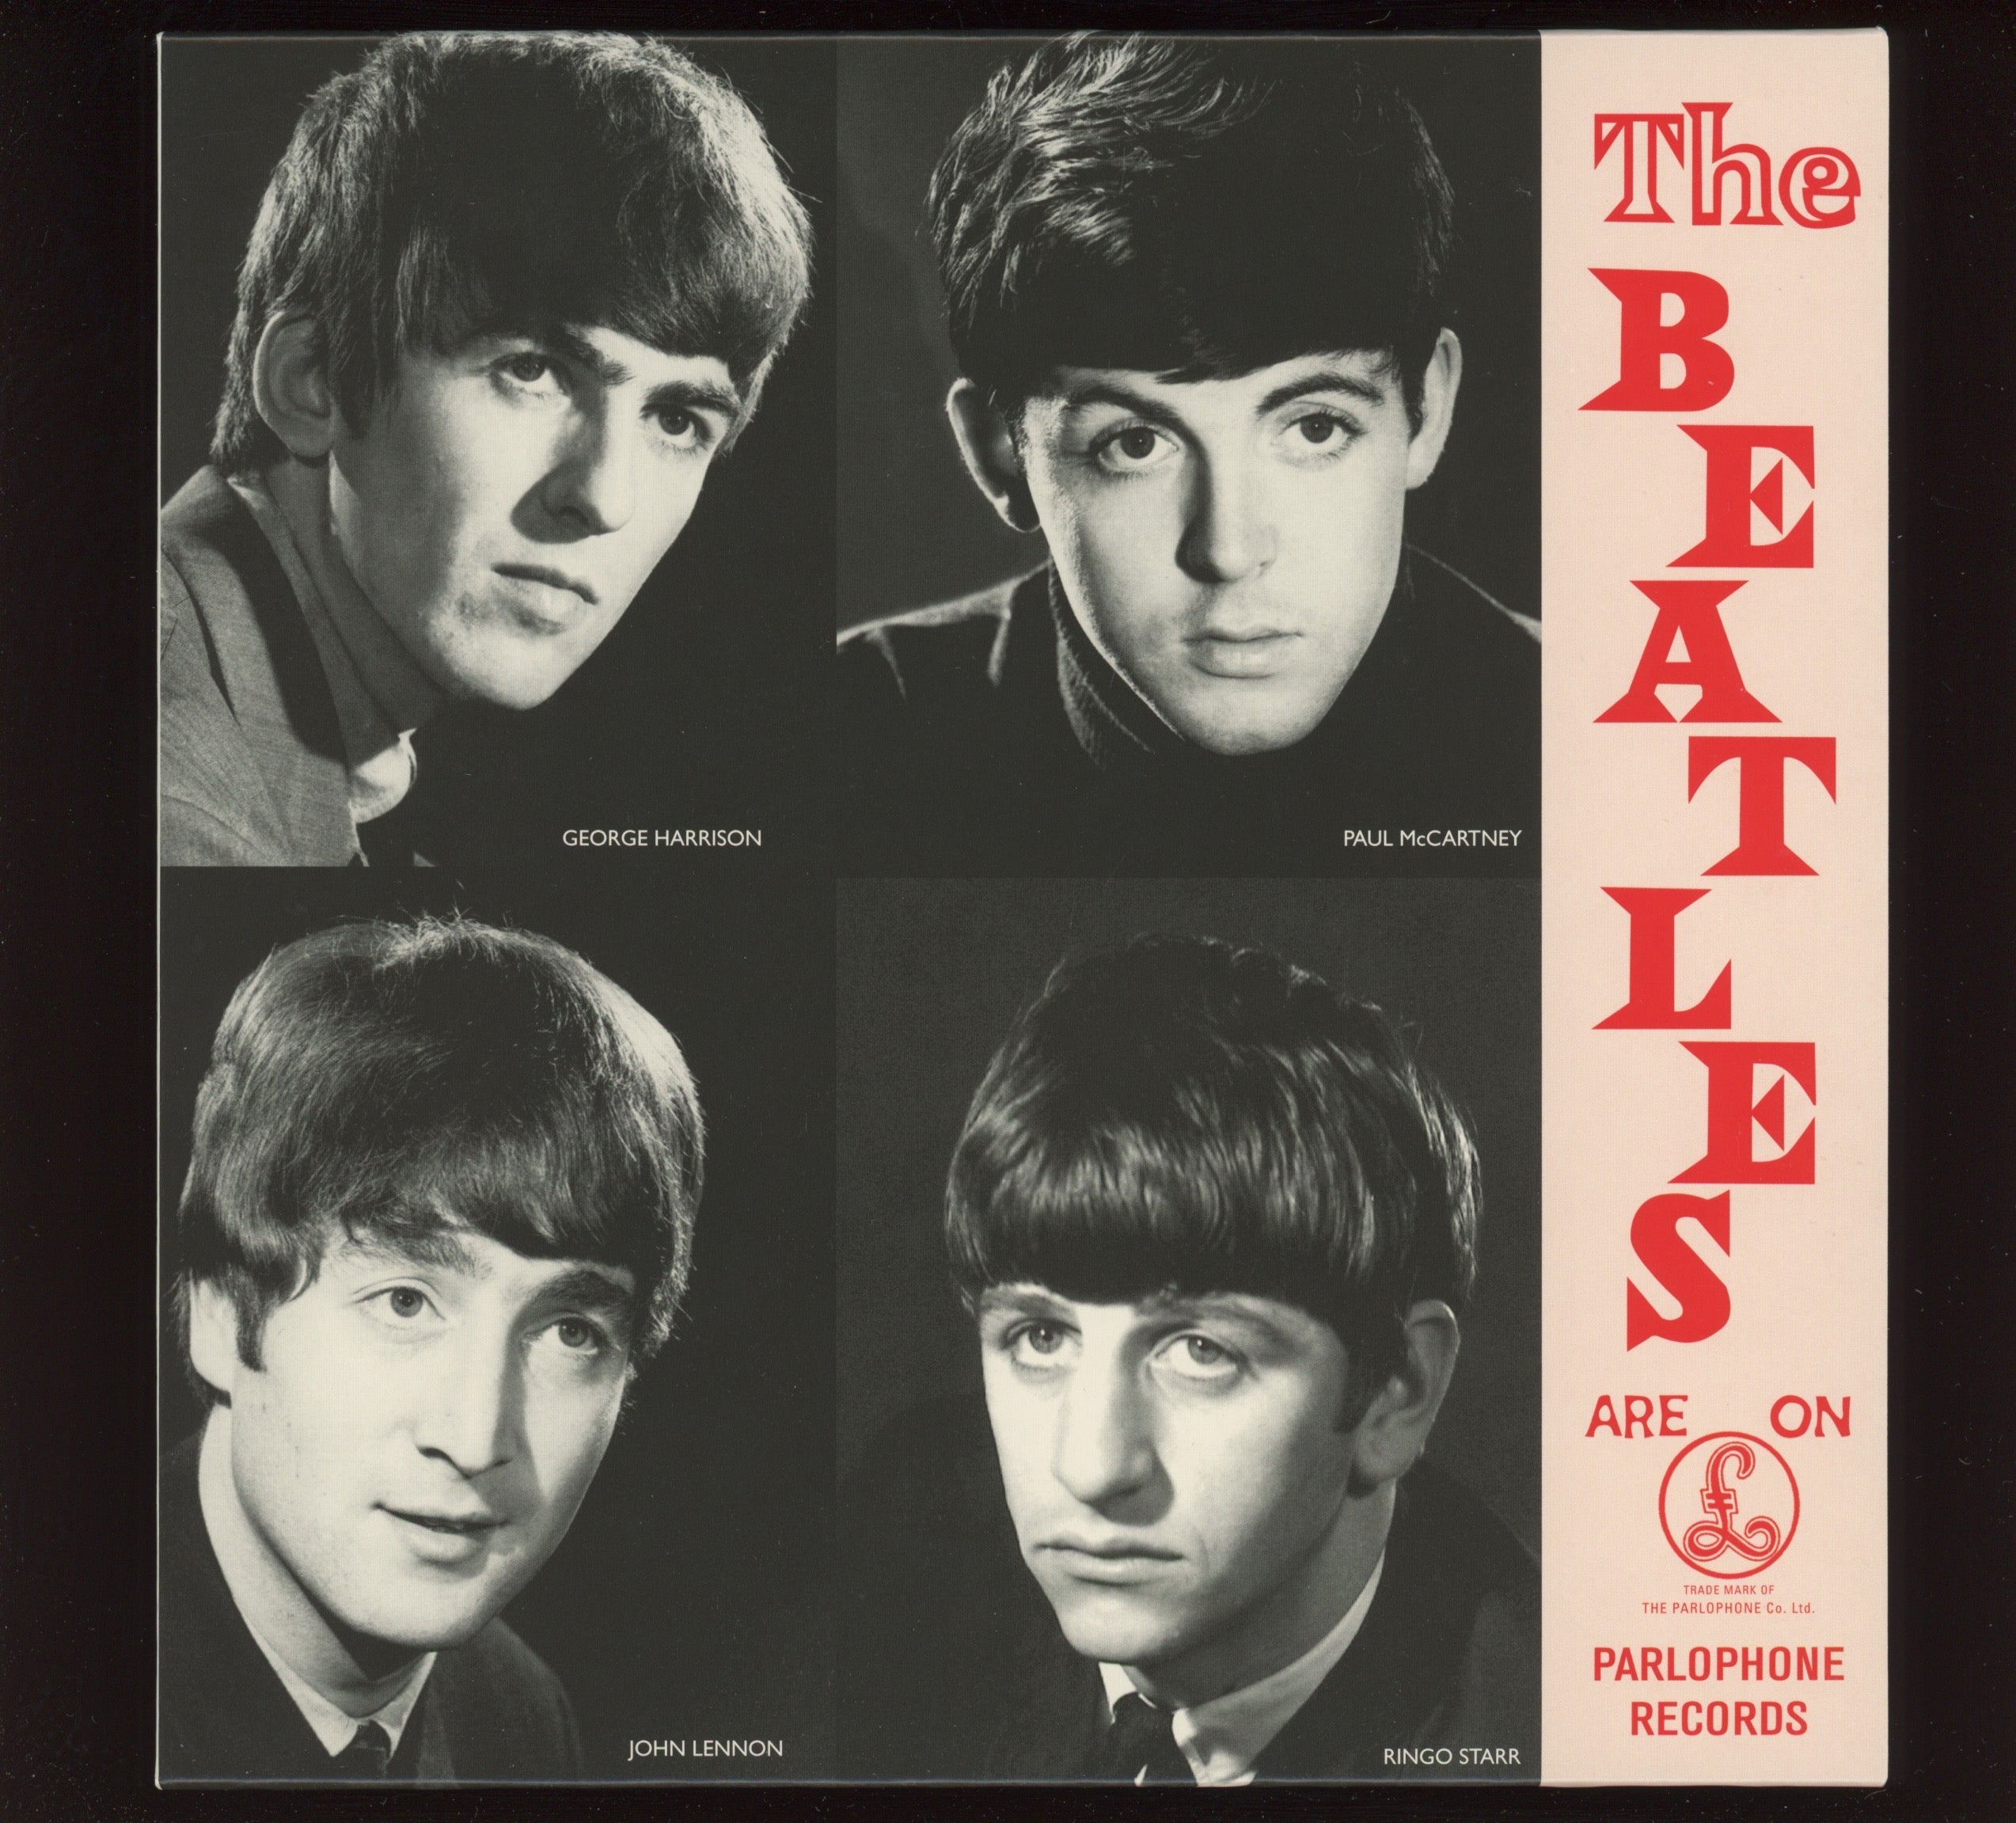 The Beatles - She Loves You on Parlophone 7" Reissue With Picture Cover